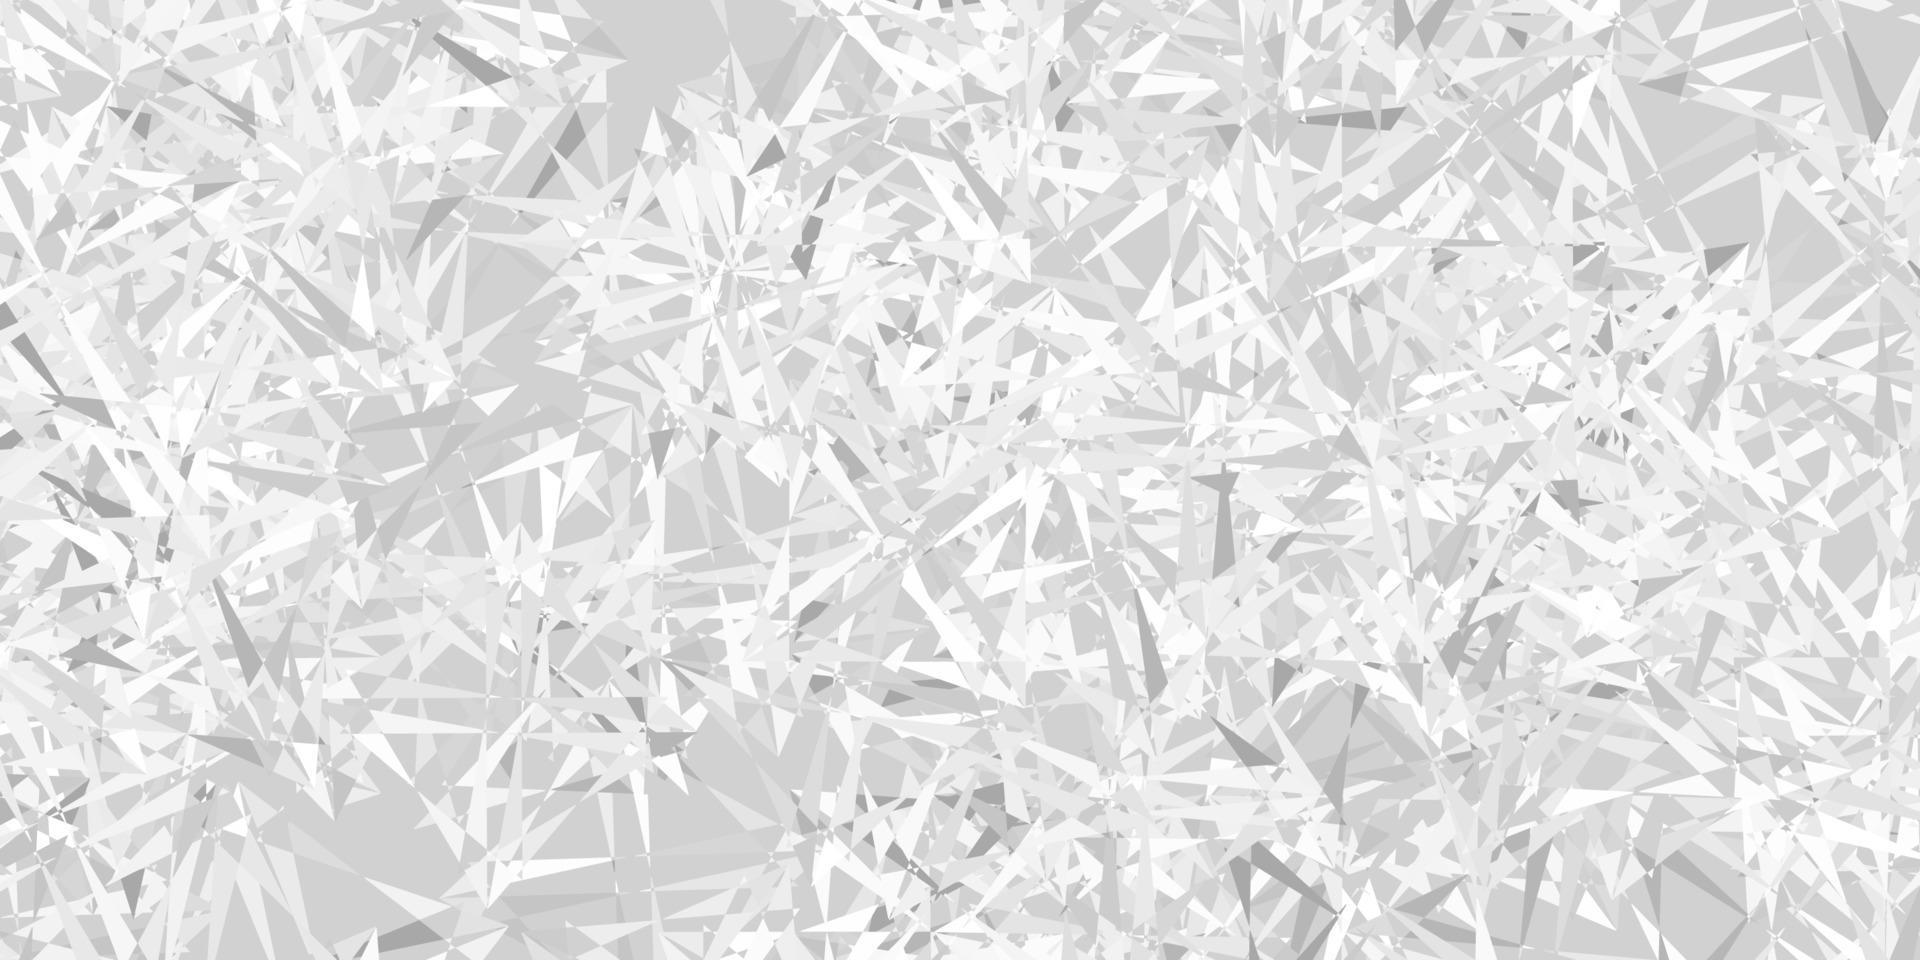 Light gray vector pattern with polygonal shapes.